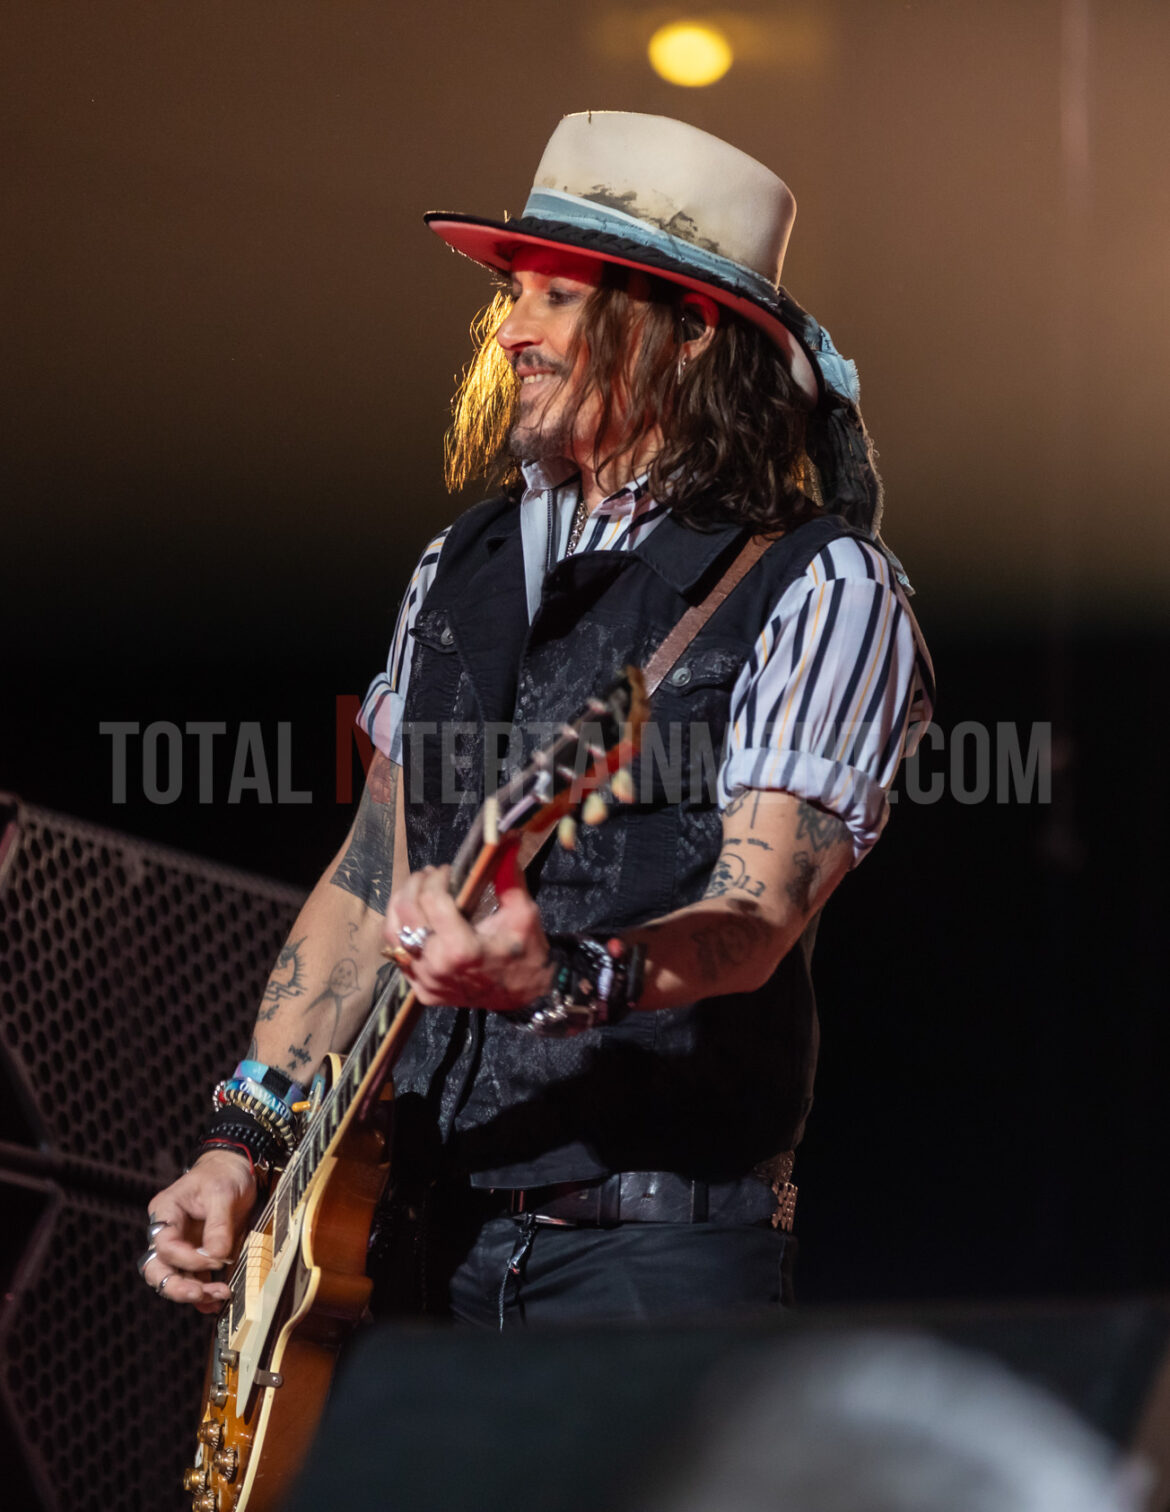 Jo Forrest, Live Event, Music Photography, Totalntertainment, Hollywood Vampires, Johnny Depp, Alice Cooper, Joe Perry, Manchester